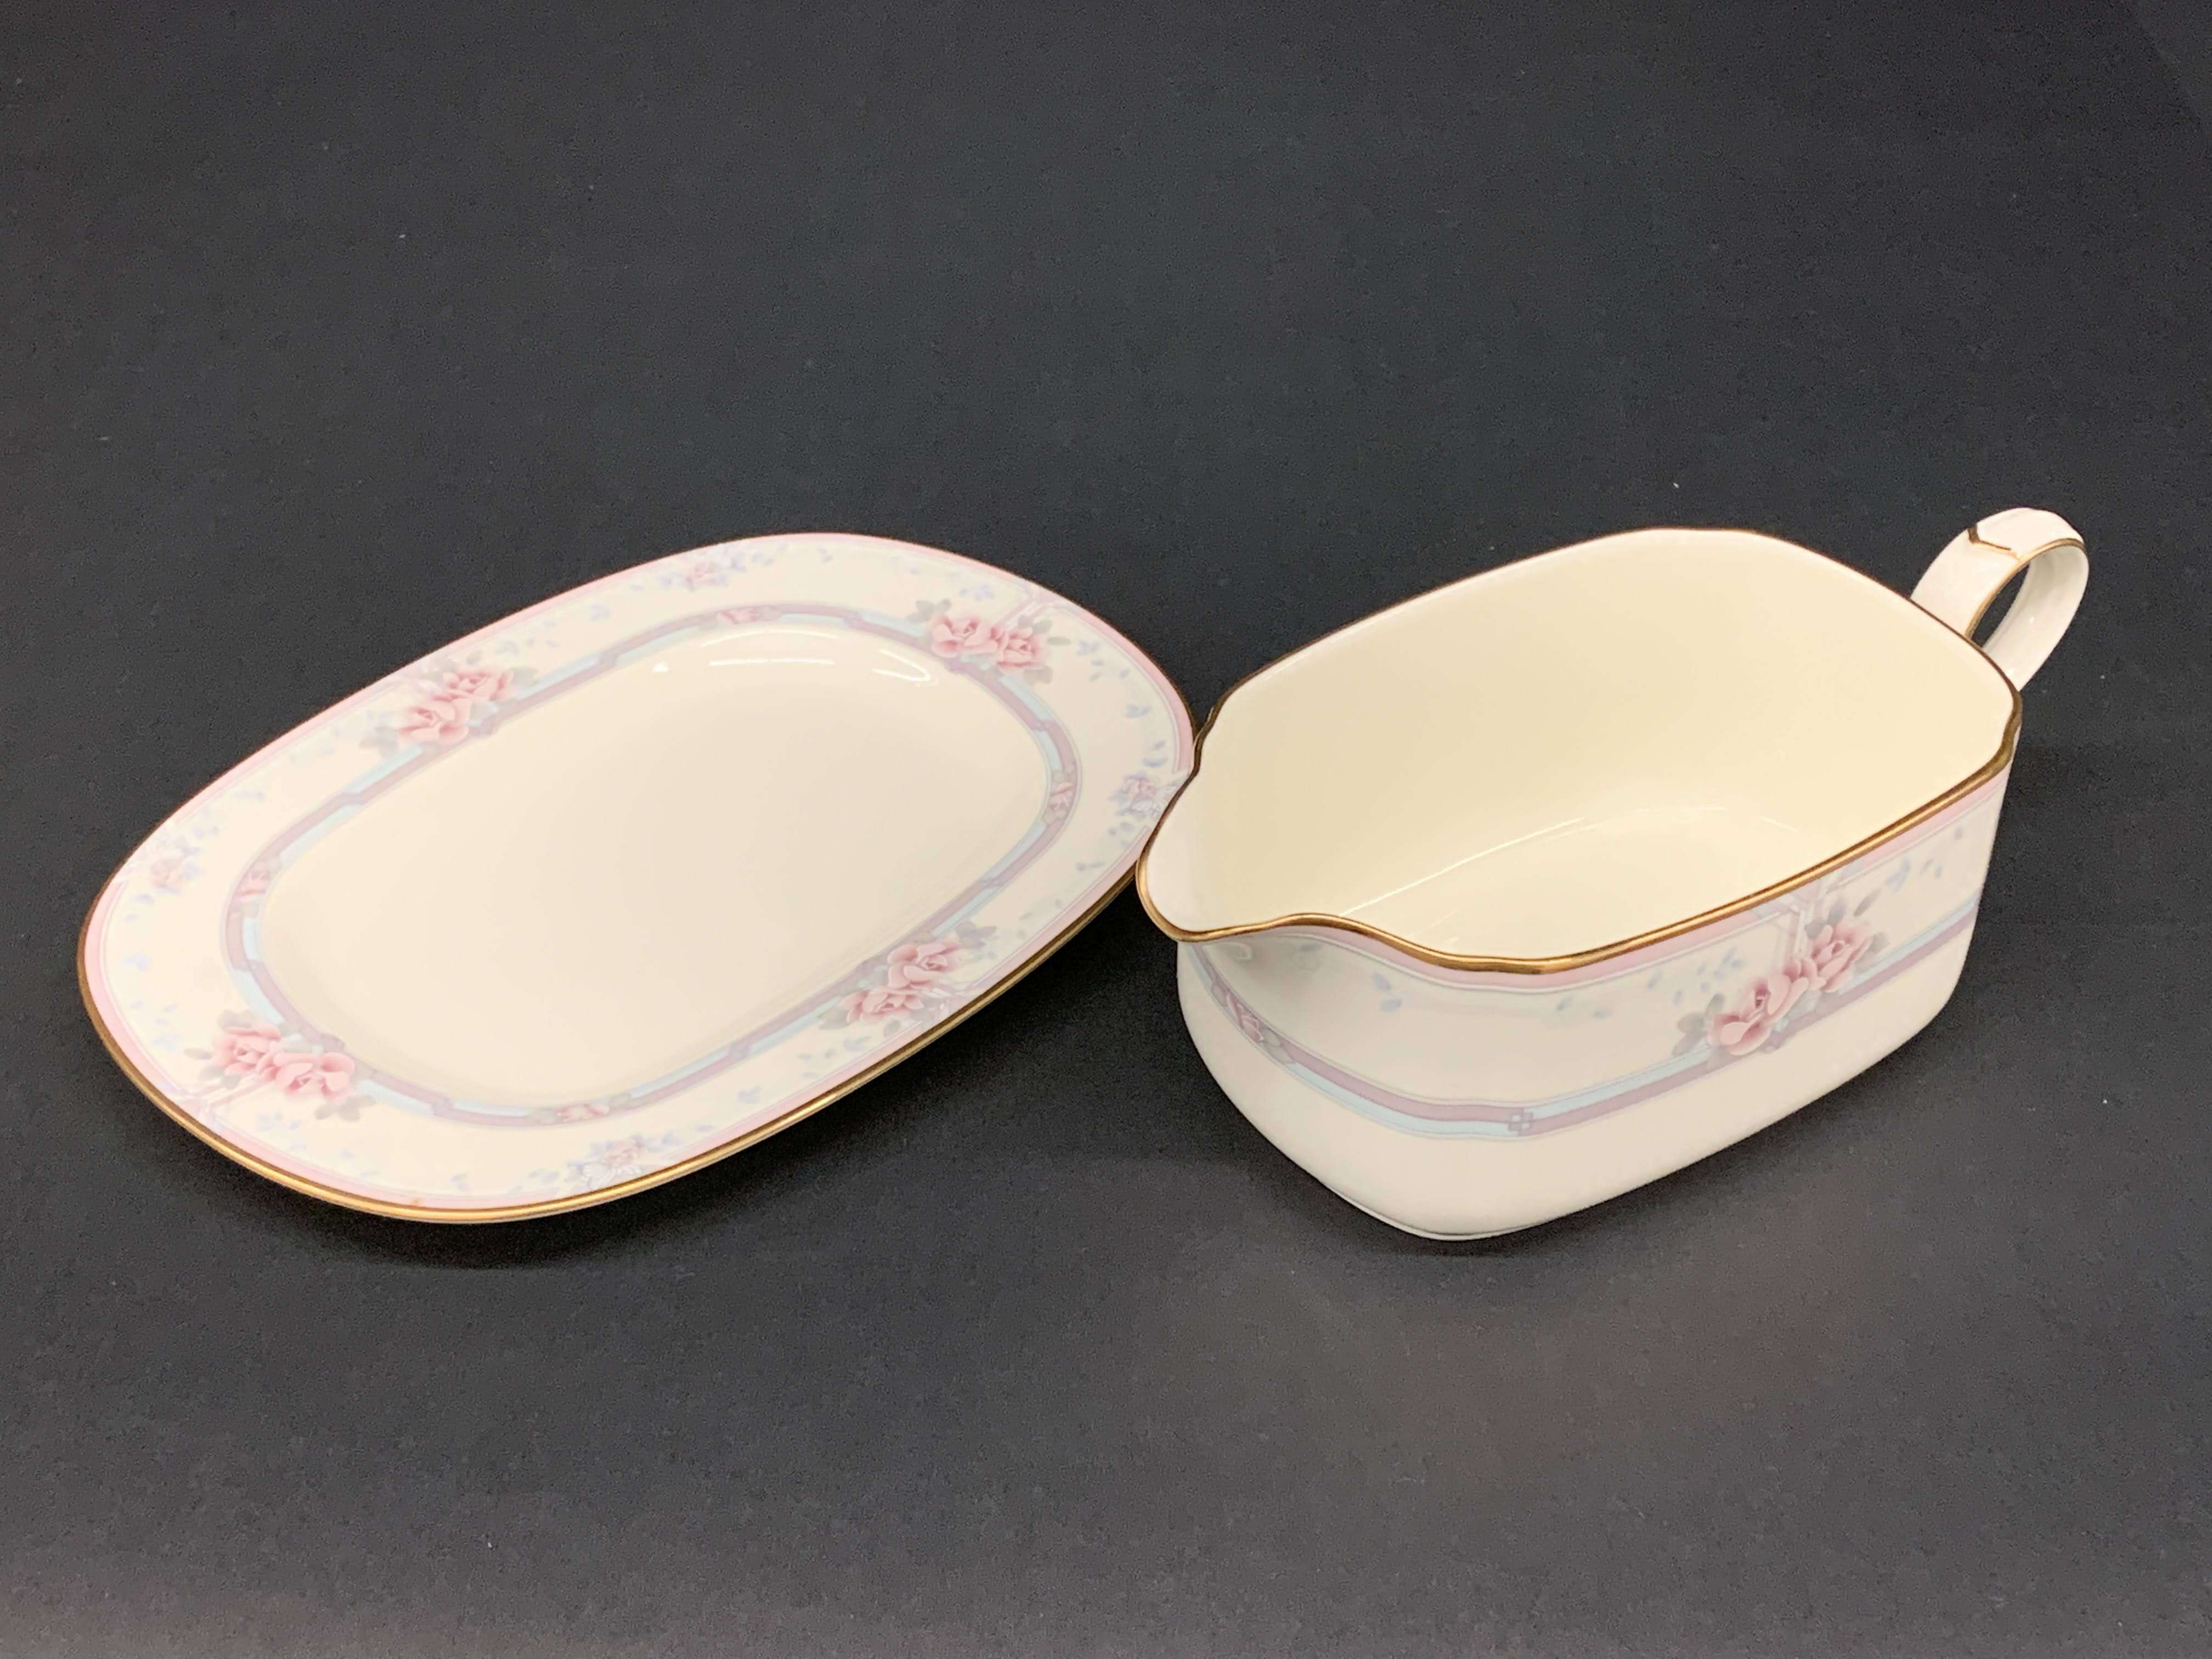 Noritake Magnificence - Fine Porcelain China - Ivory Pink Color Gold Band - Gravy Bowl With Plate